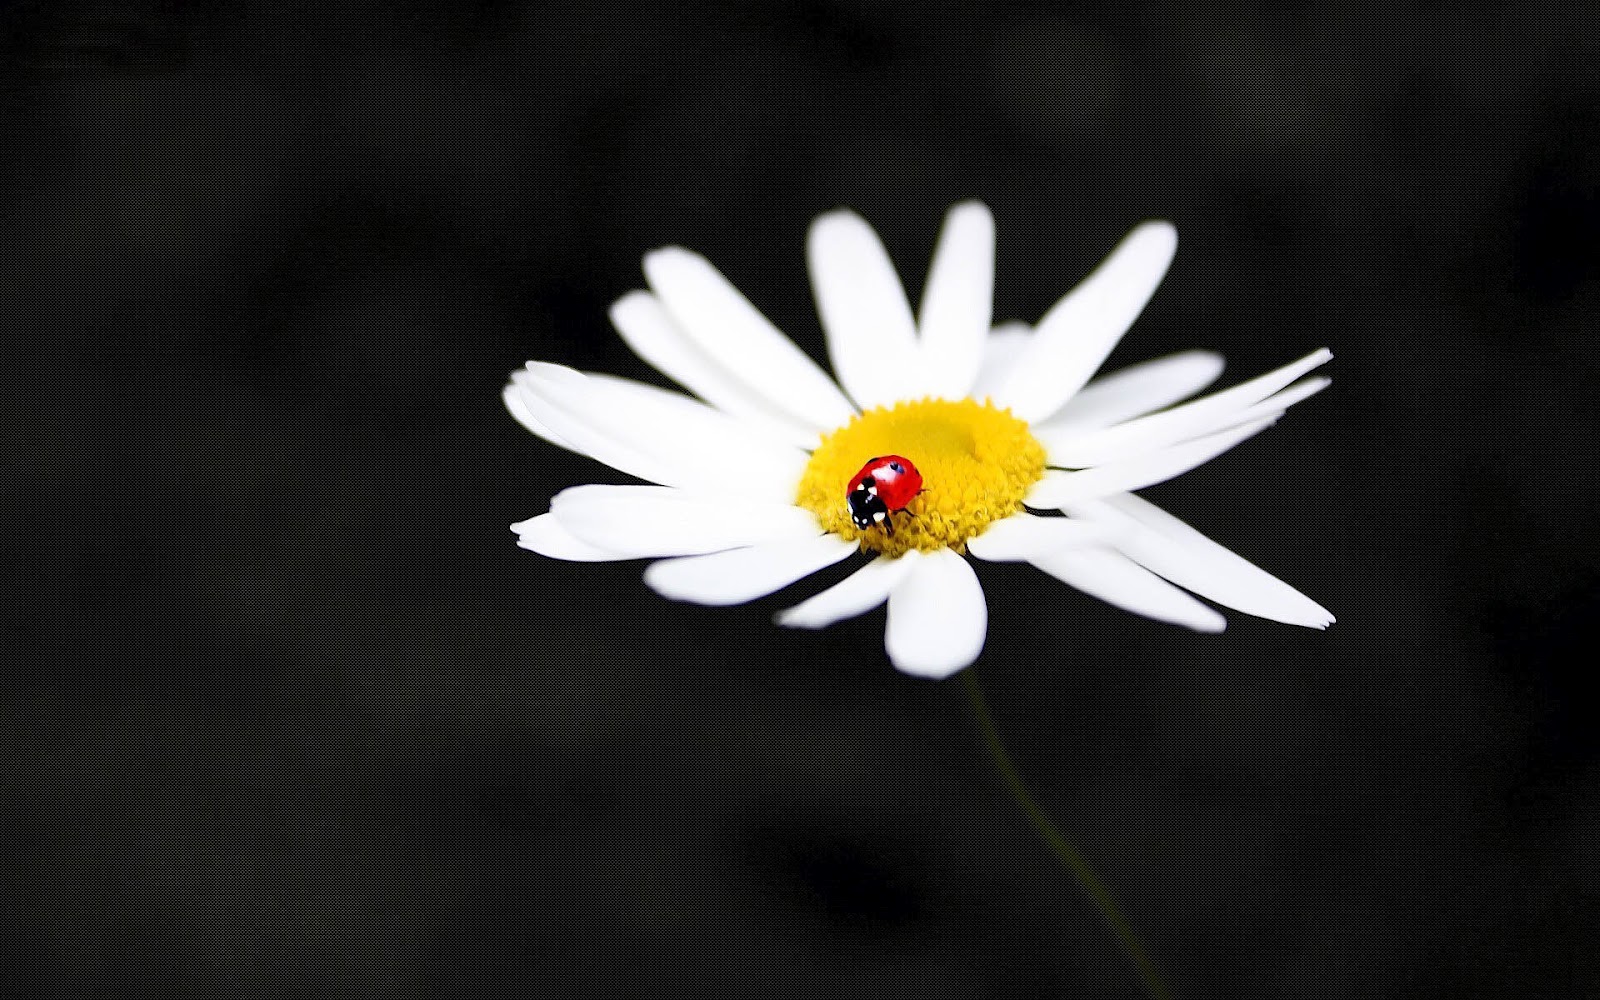 HD Ladybug Wallpaper With A Walking On White Flower